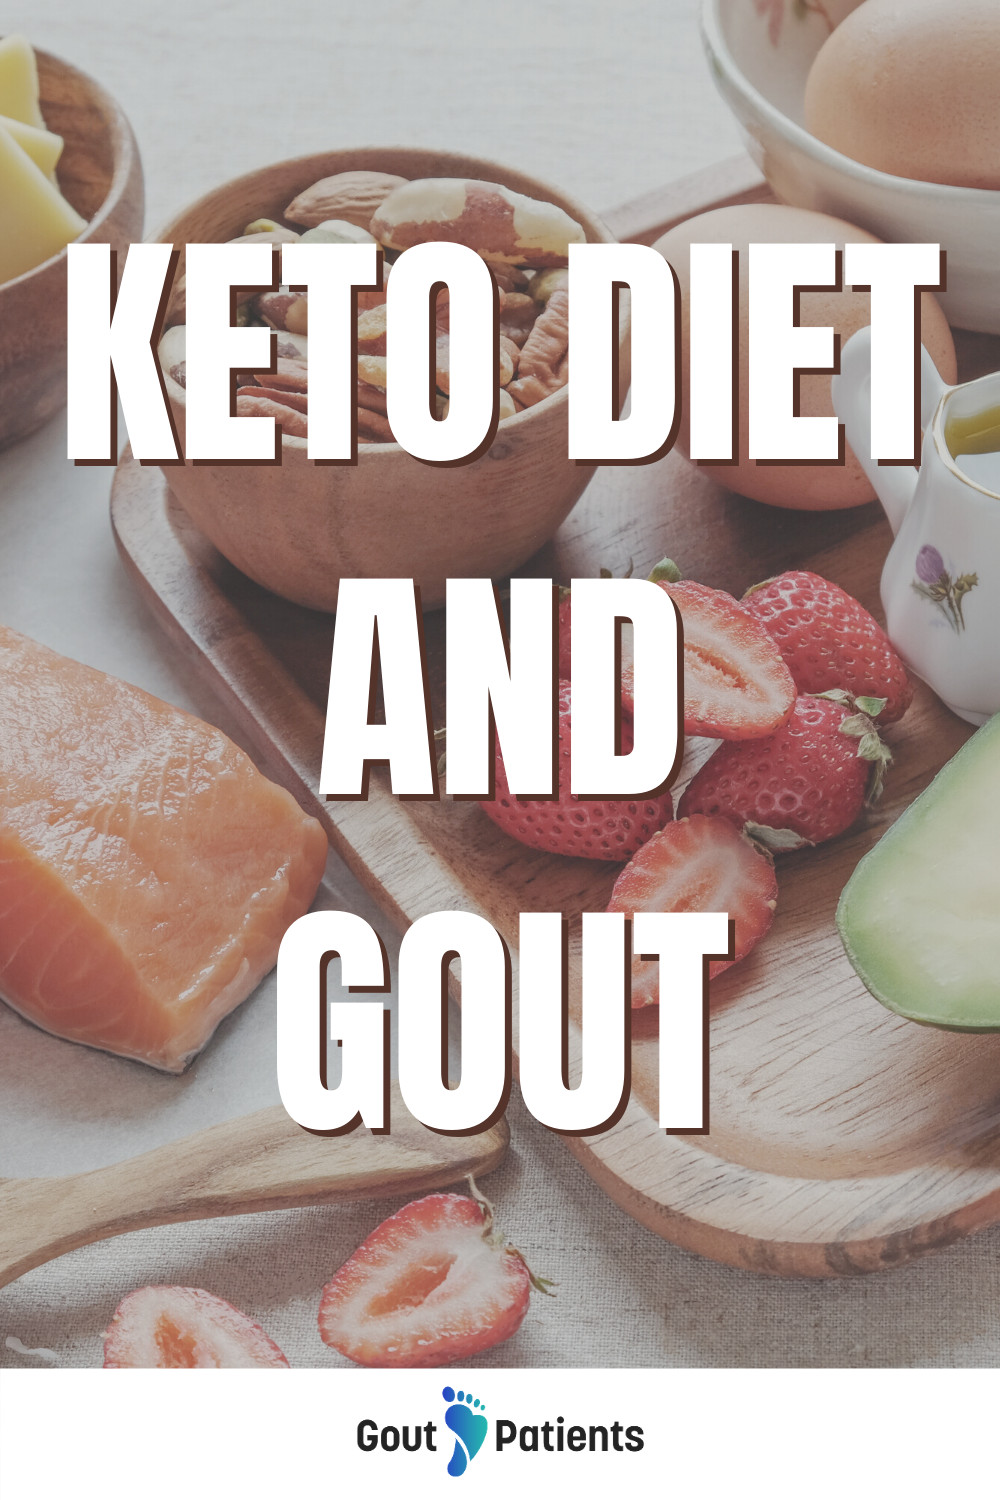 Keto Diet Gout
 Keto Diet and Gout in 2020